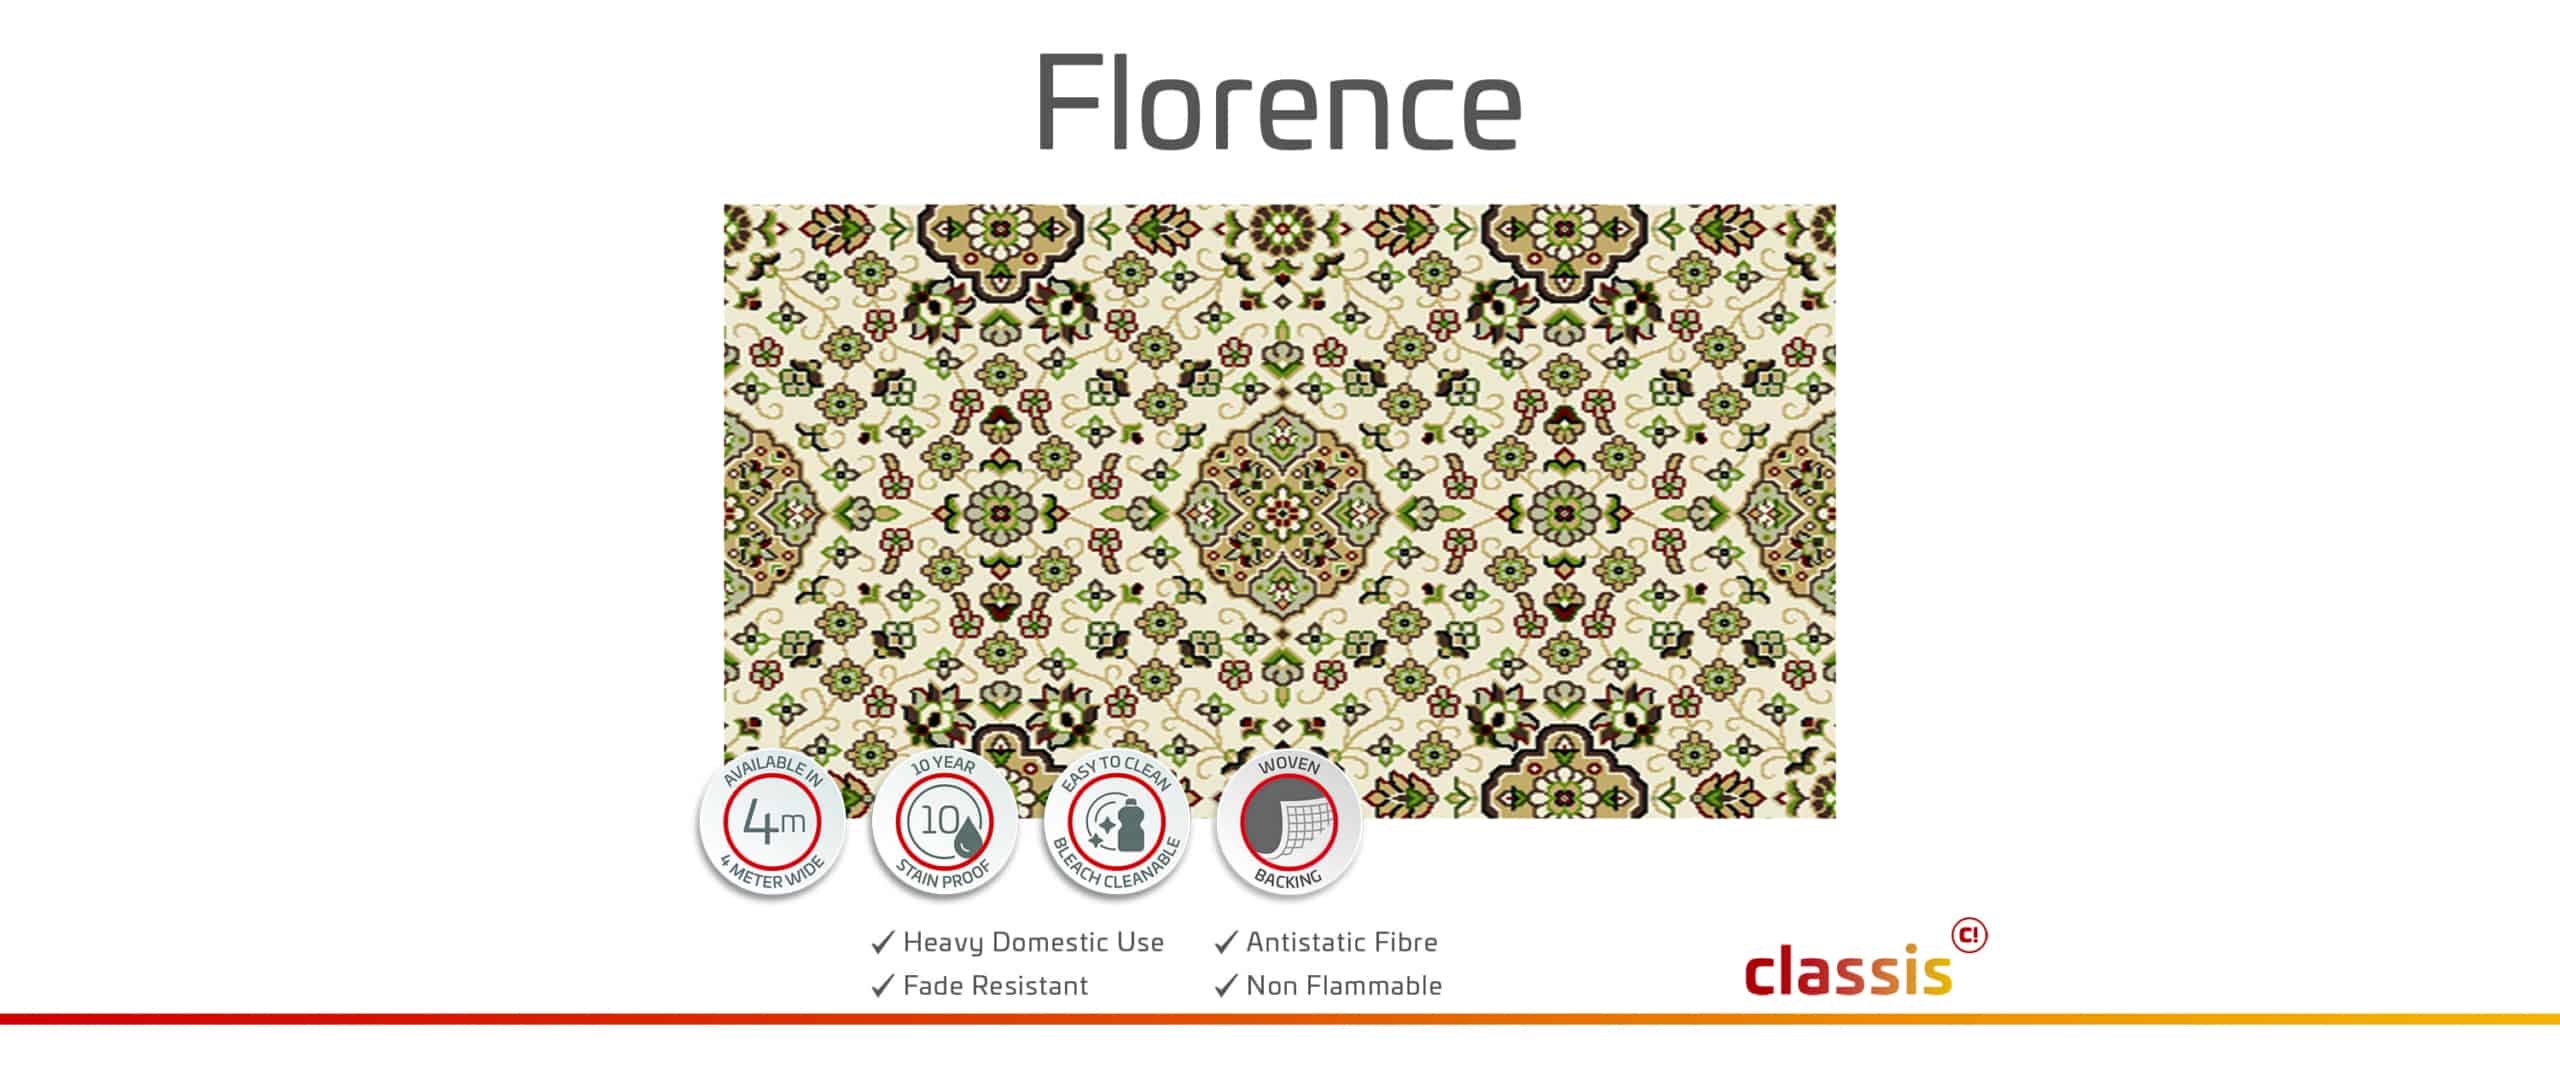 Florence Website 3000x1260px